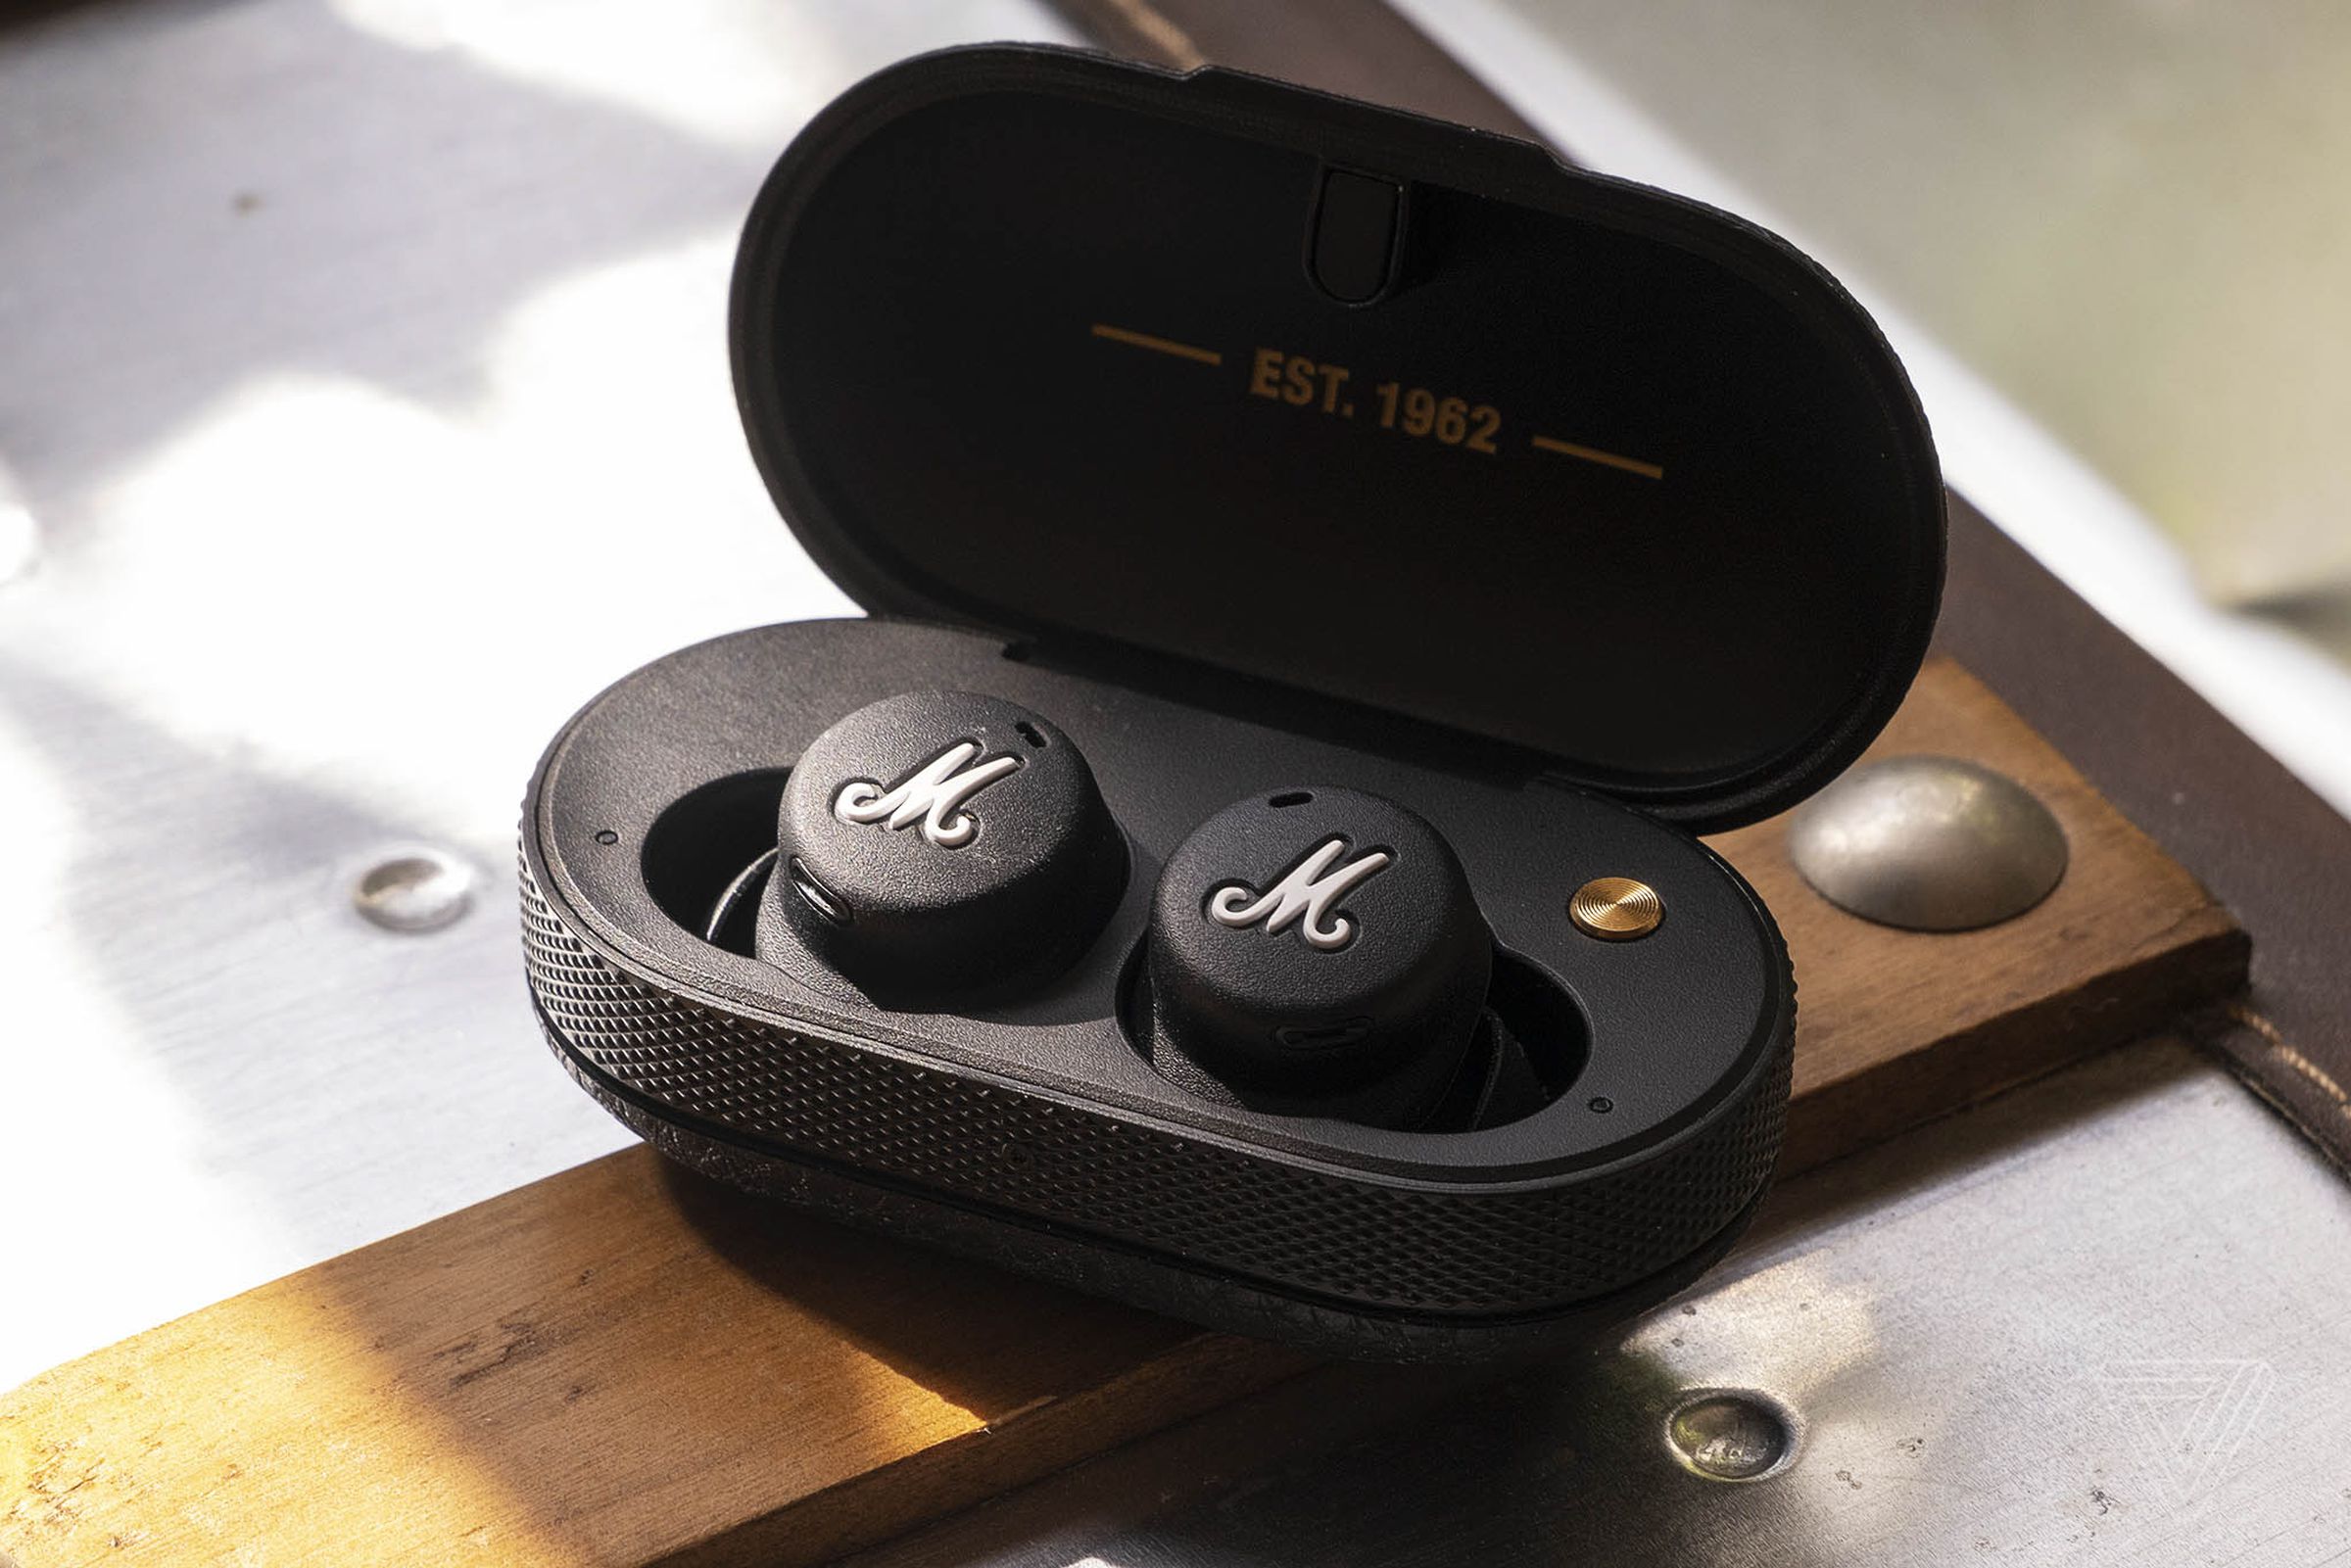 There are separate LEDs to show charge status for both earbuds and the case.